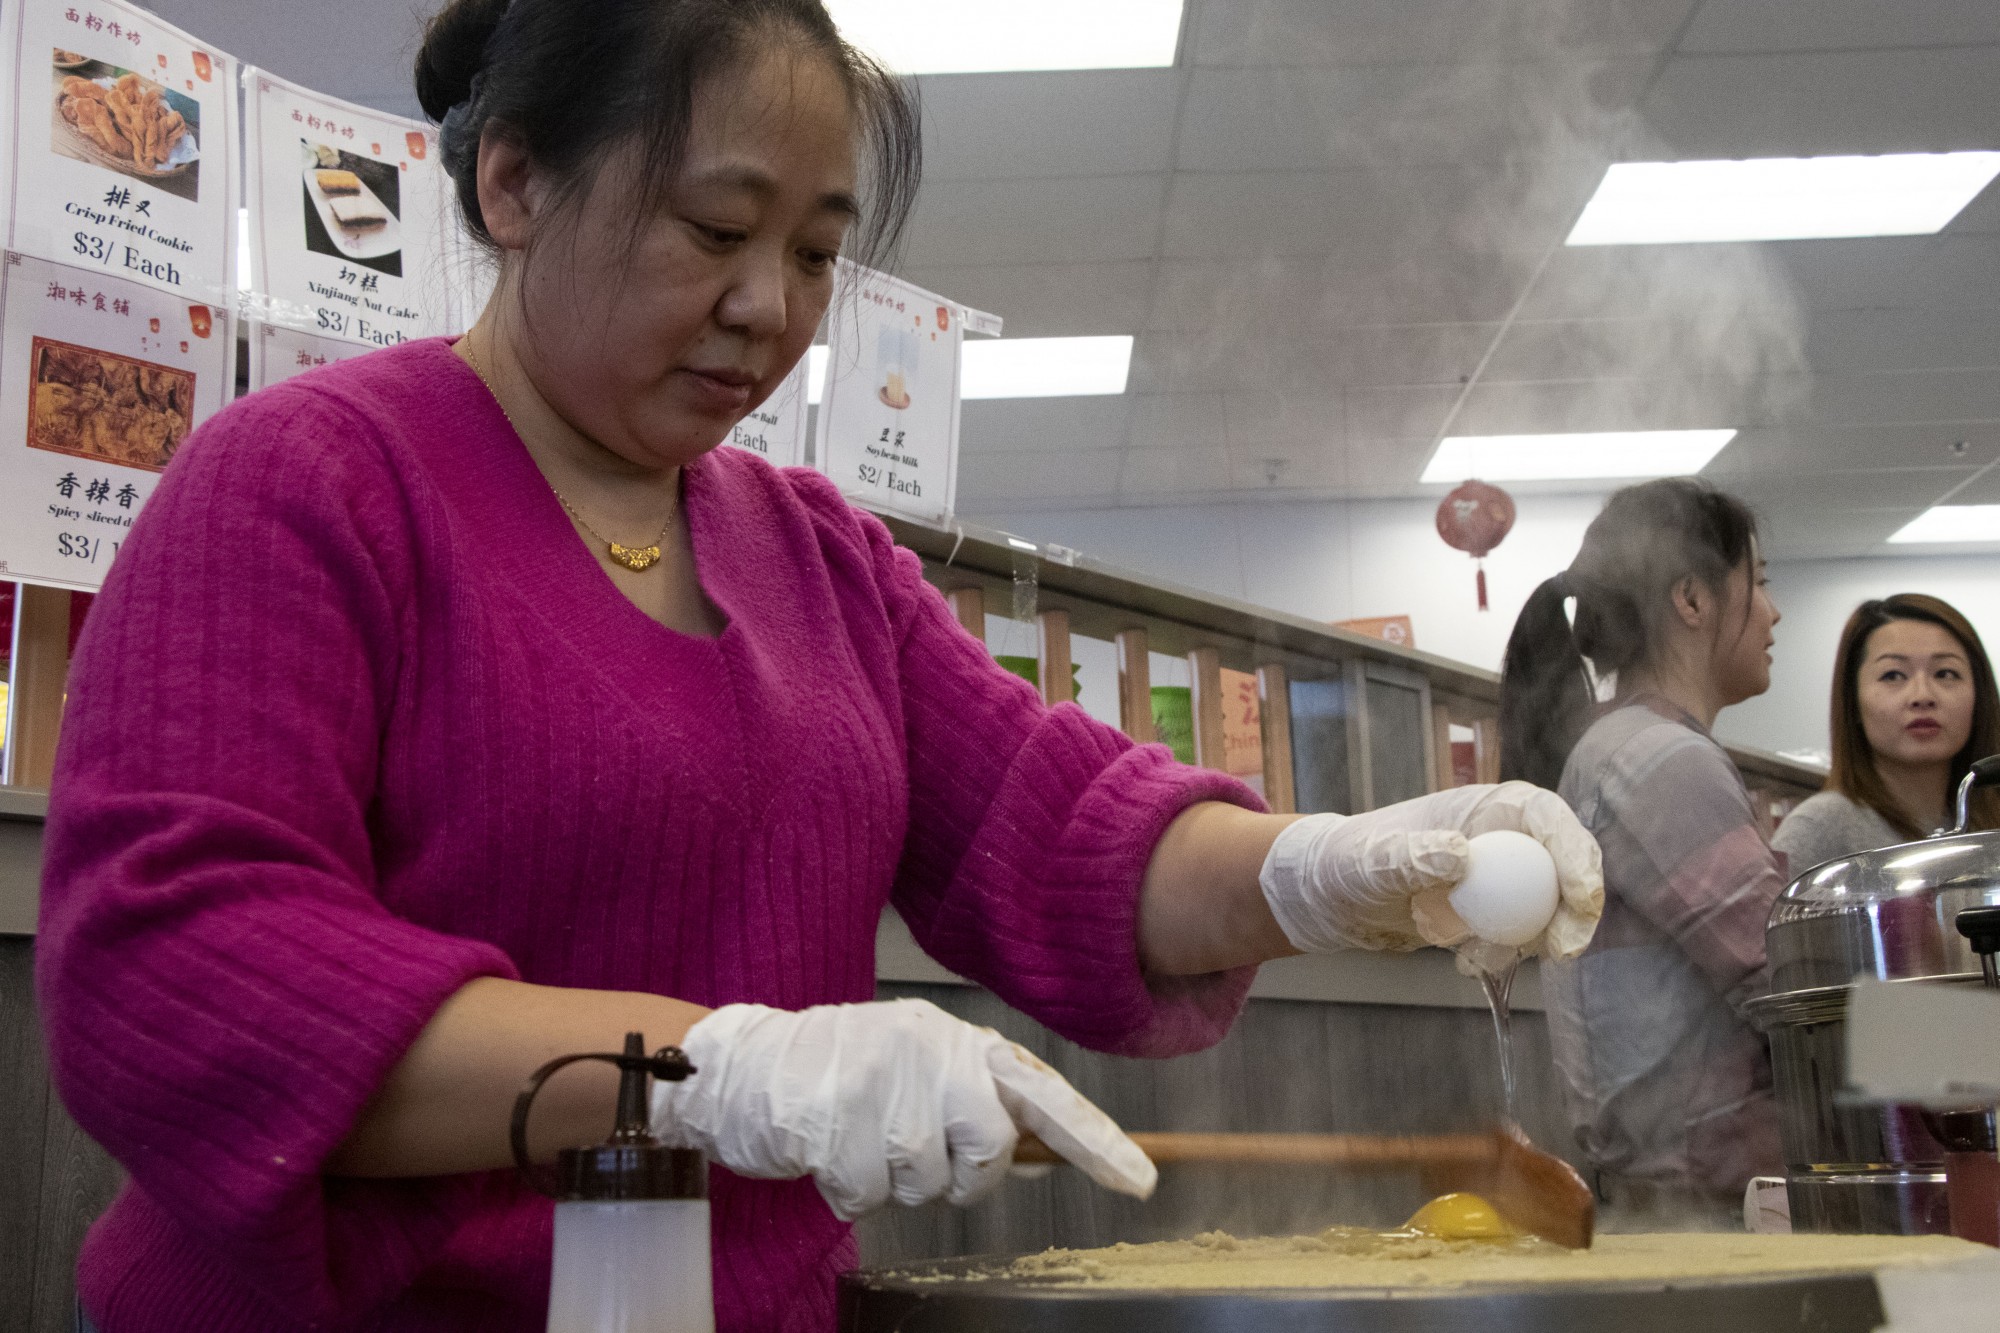 Qingjun Zhang prepares Tianjin crepes at the Lunar New Year celebration at University Food Hall in Dinkytown on Sunday, Jan 26. The crepes are a traditional northern Chinese food, one of many dishes available for purchase at the celebration. 